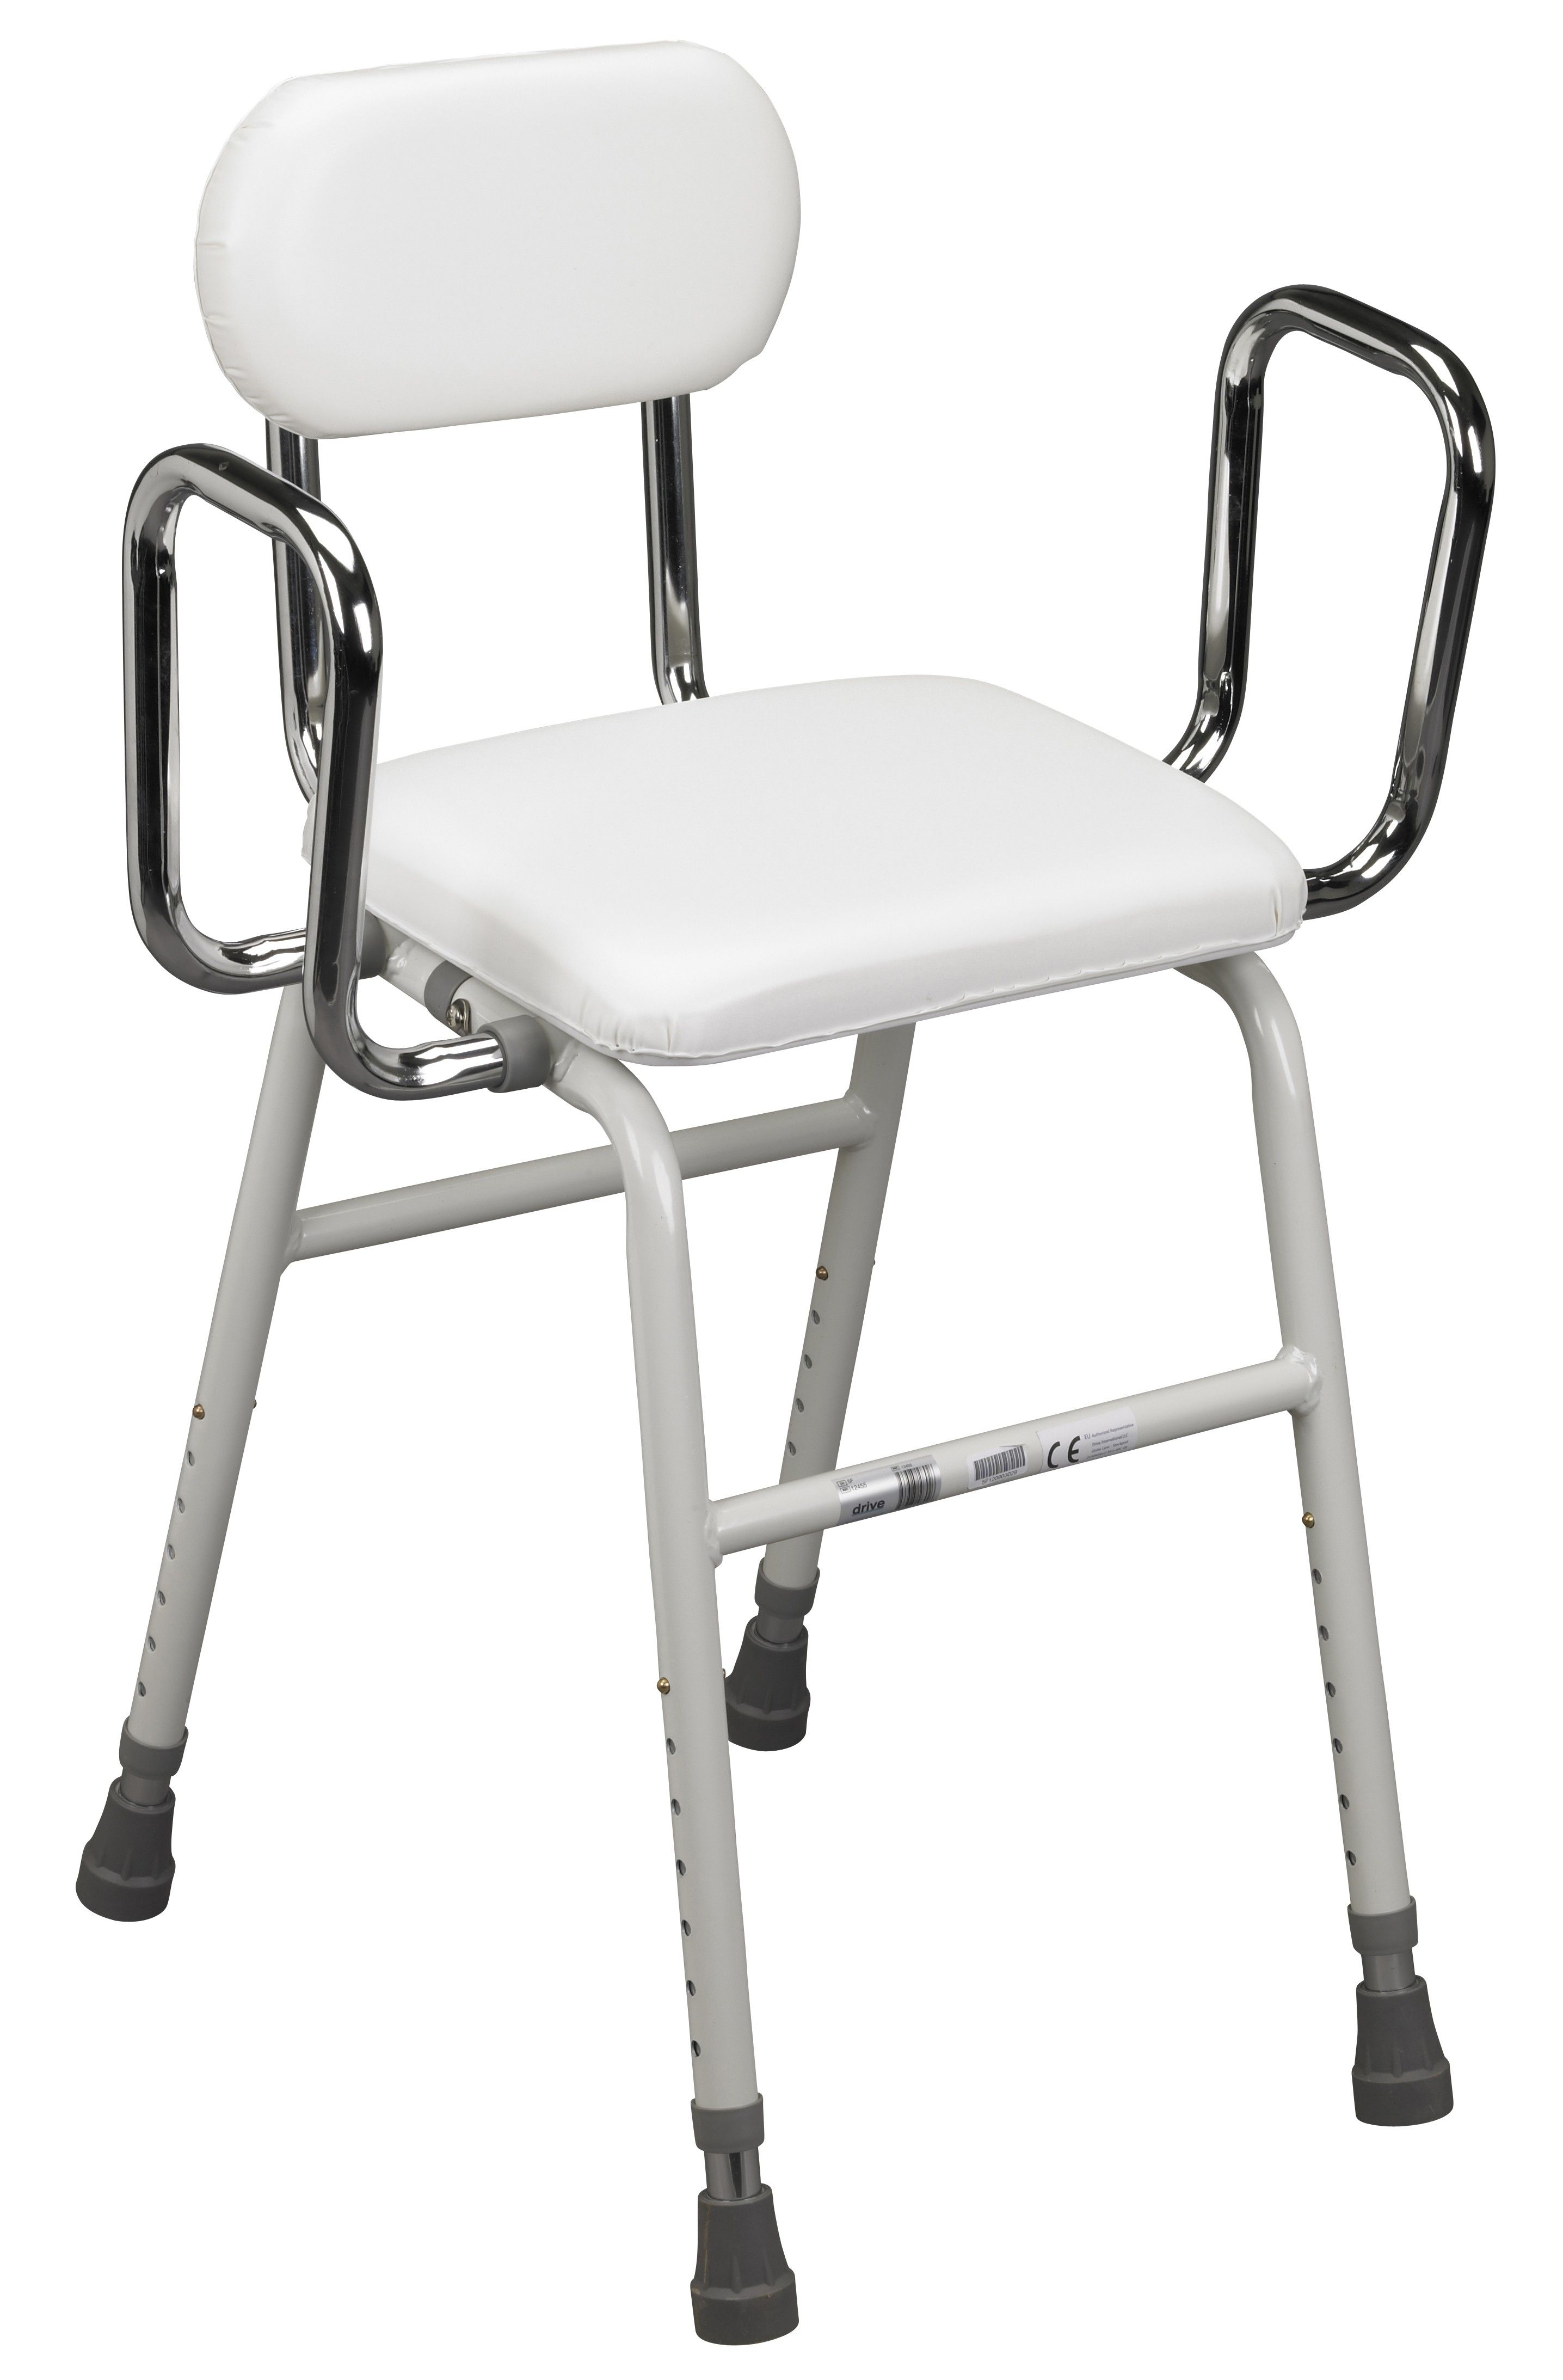 tall shower chairs for elderly